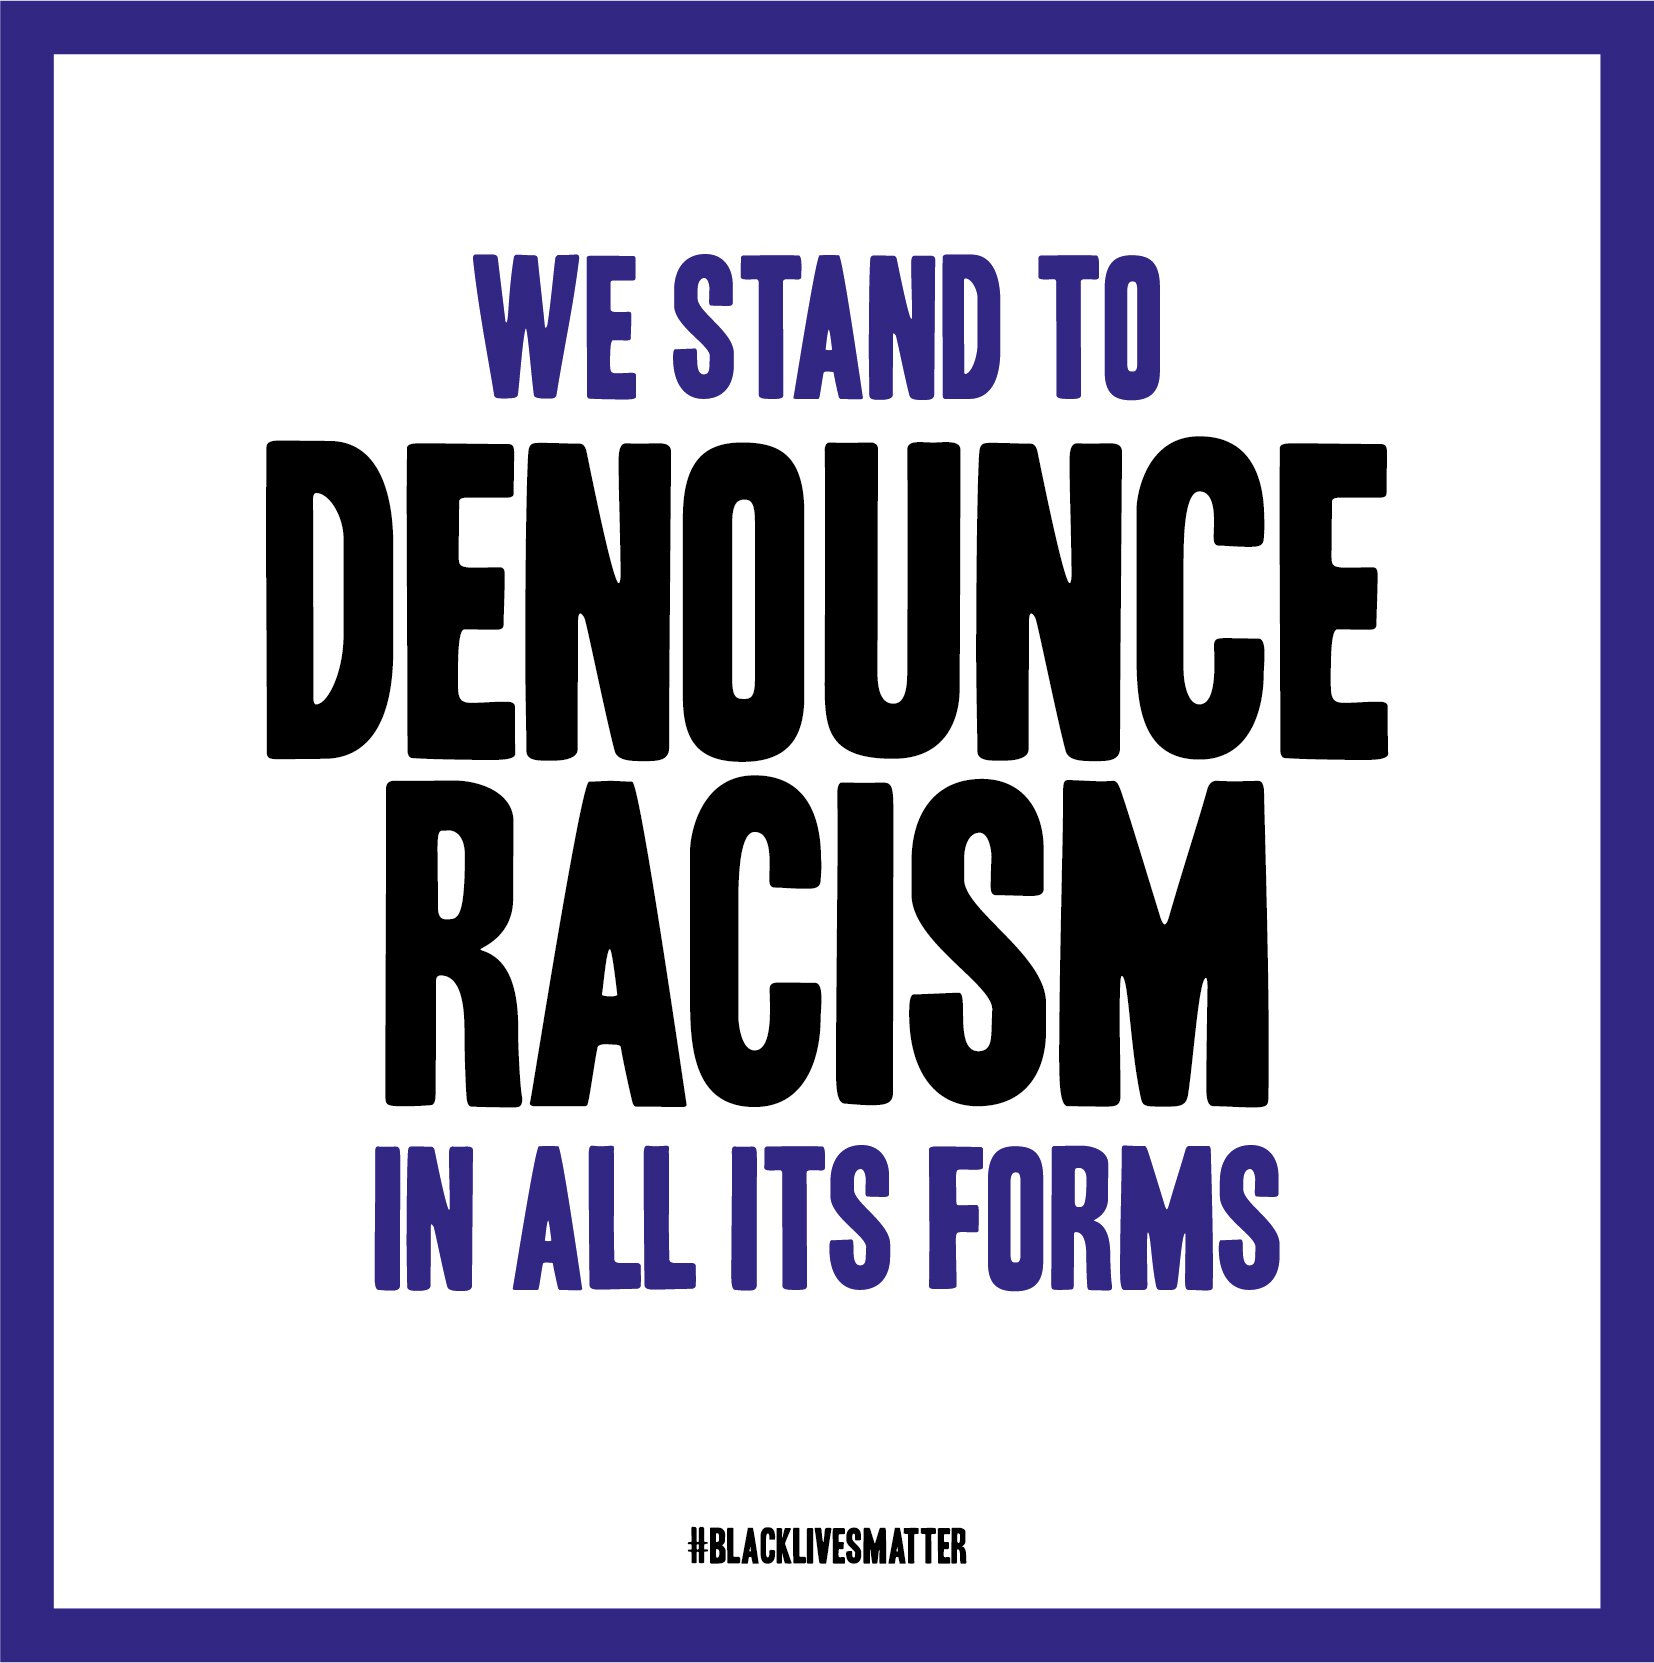 We stand to denounce racism